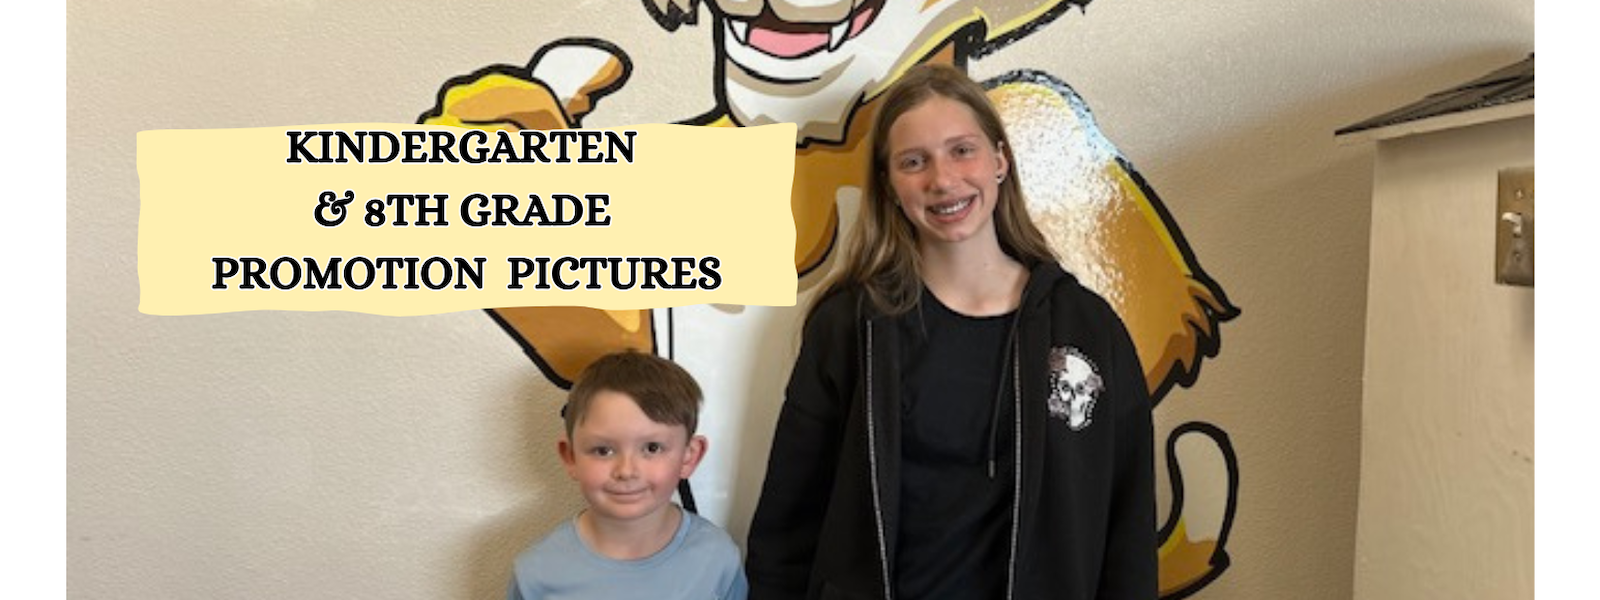 2 students by a mountain lion image with words Kindergarten & 8th grade promotion pictures